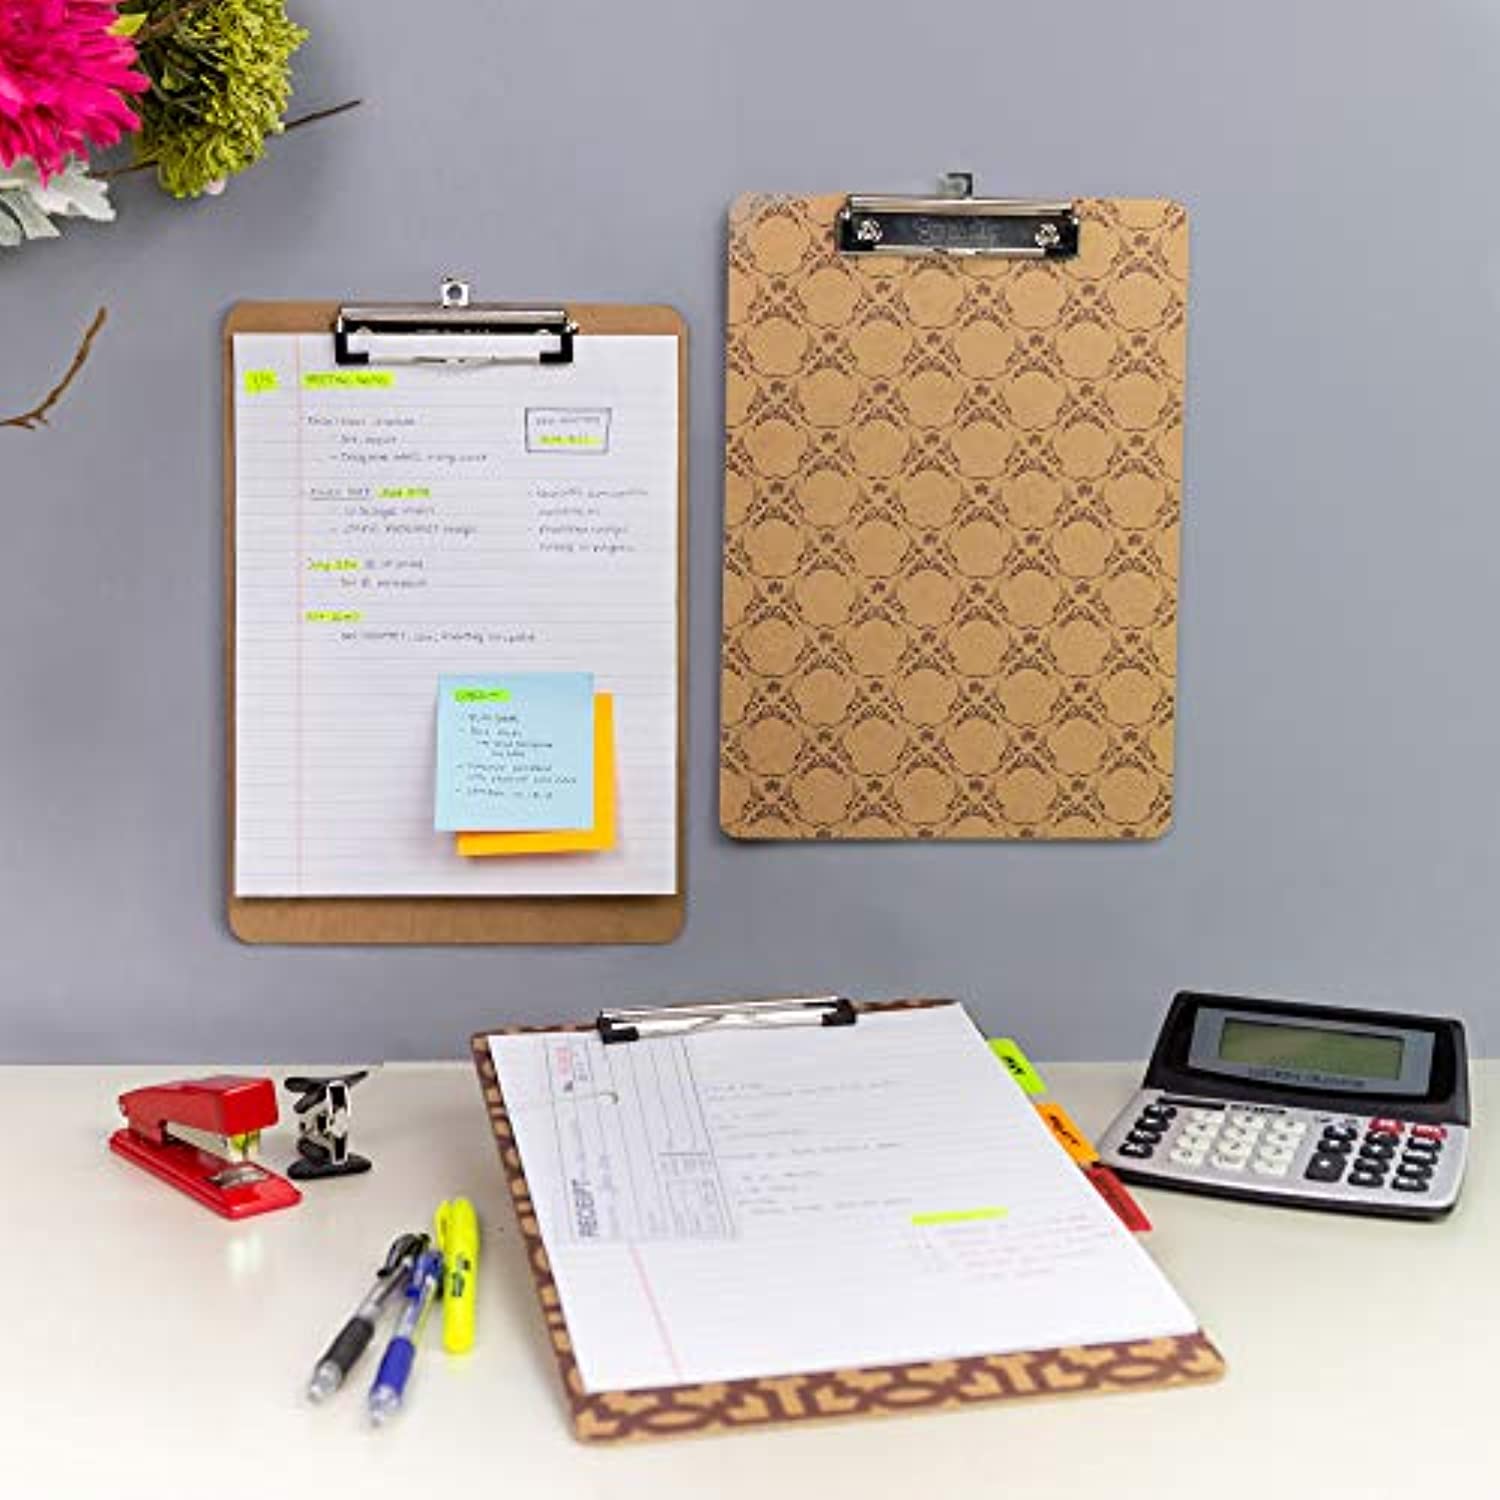 Wood Hardboard Clipboard w/Low Profile Clip, 12.5" x 9" Fit A4 Letter Size Paperboard, Business Office School Teacher Student College, 1-Pack.